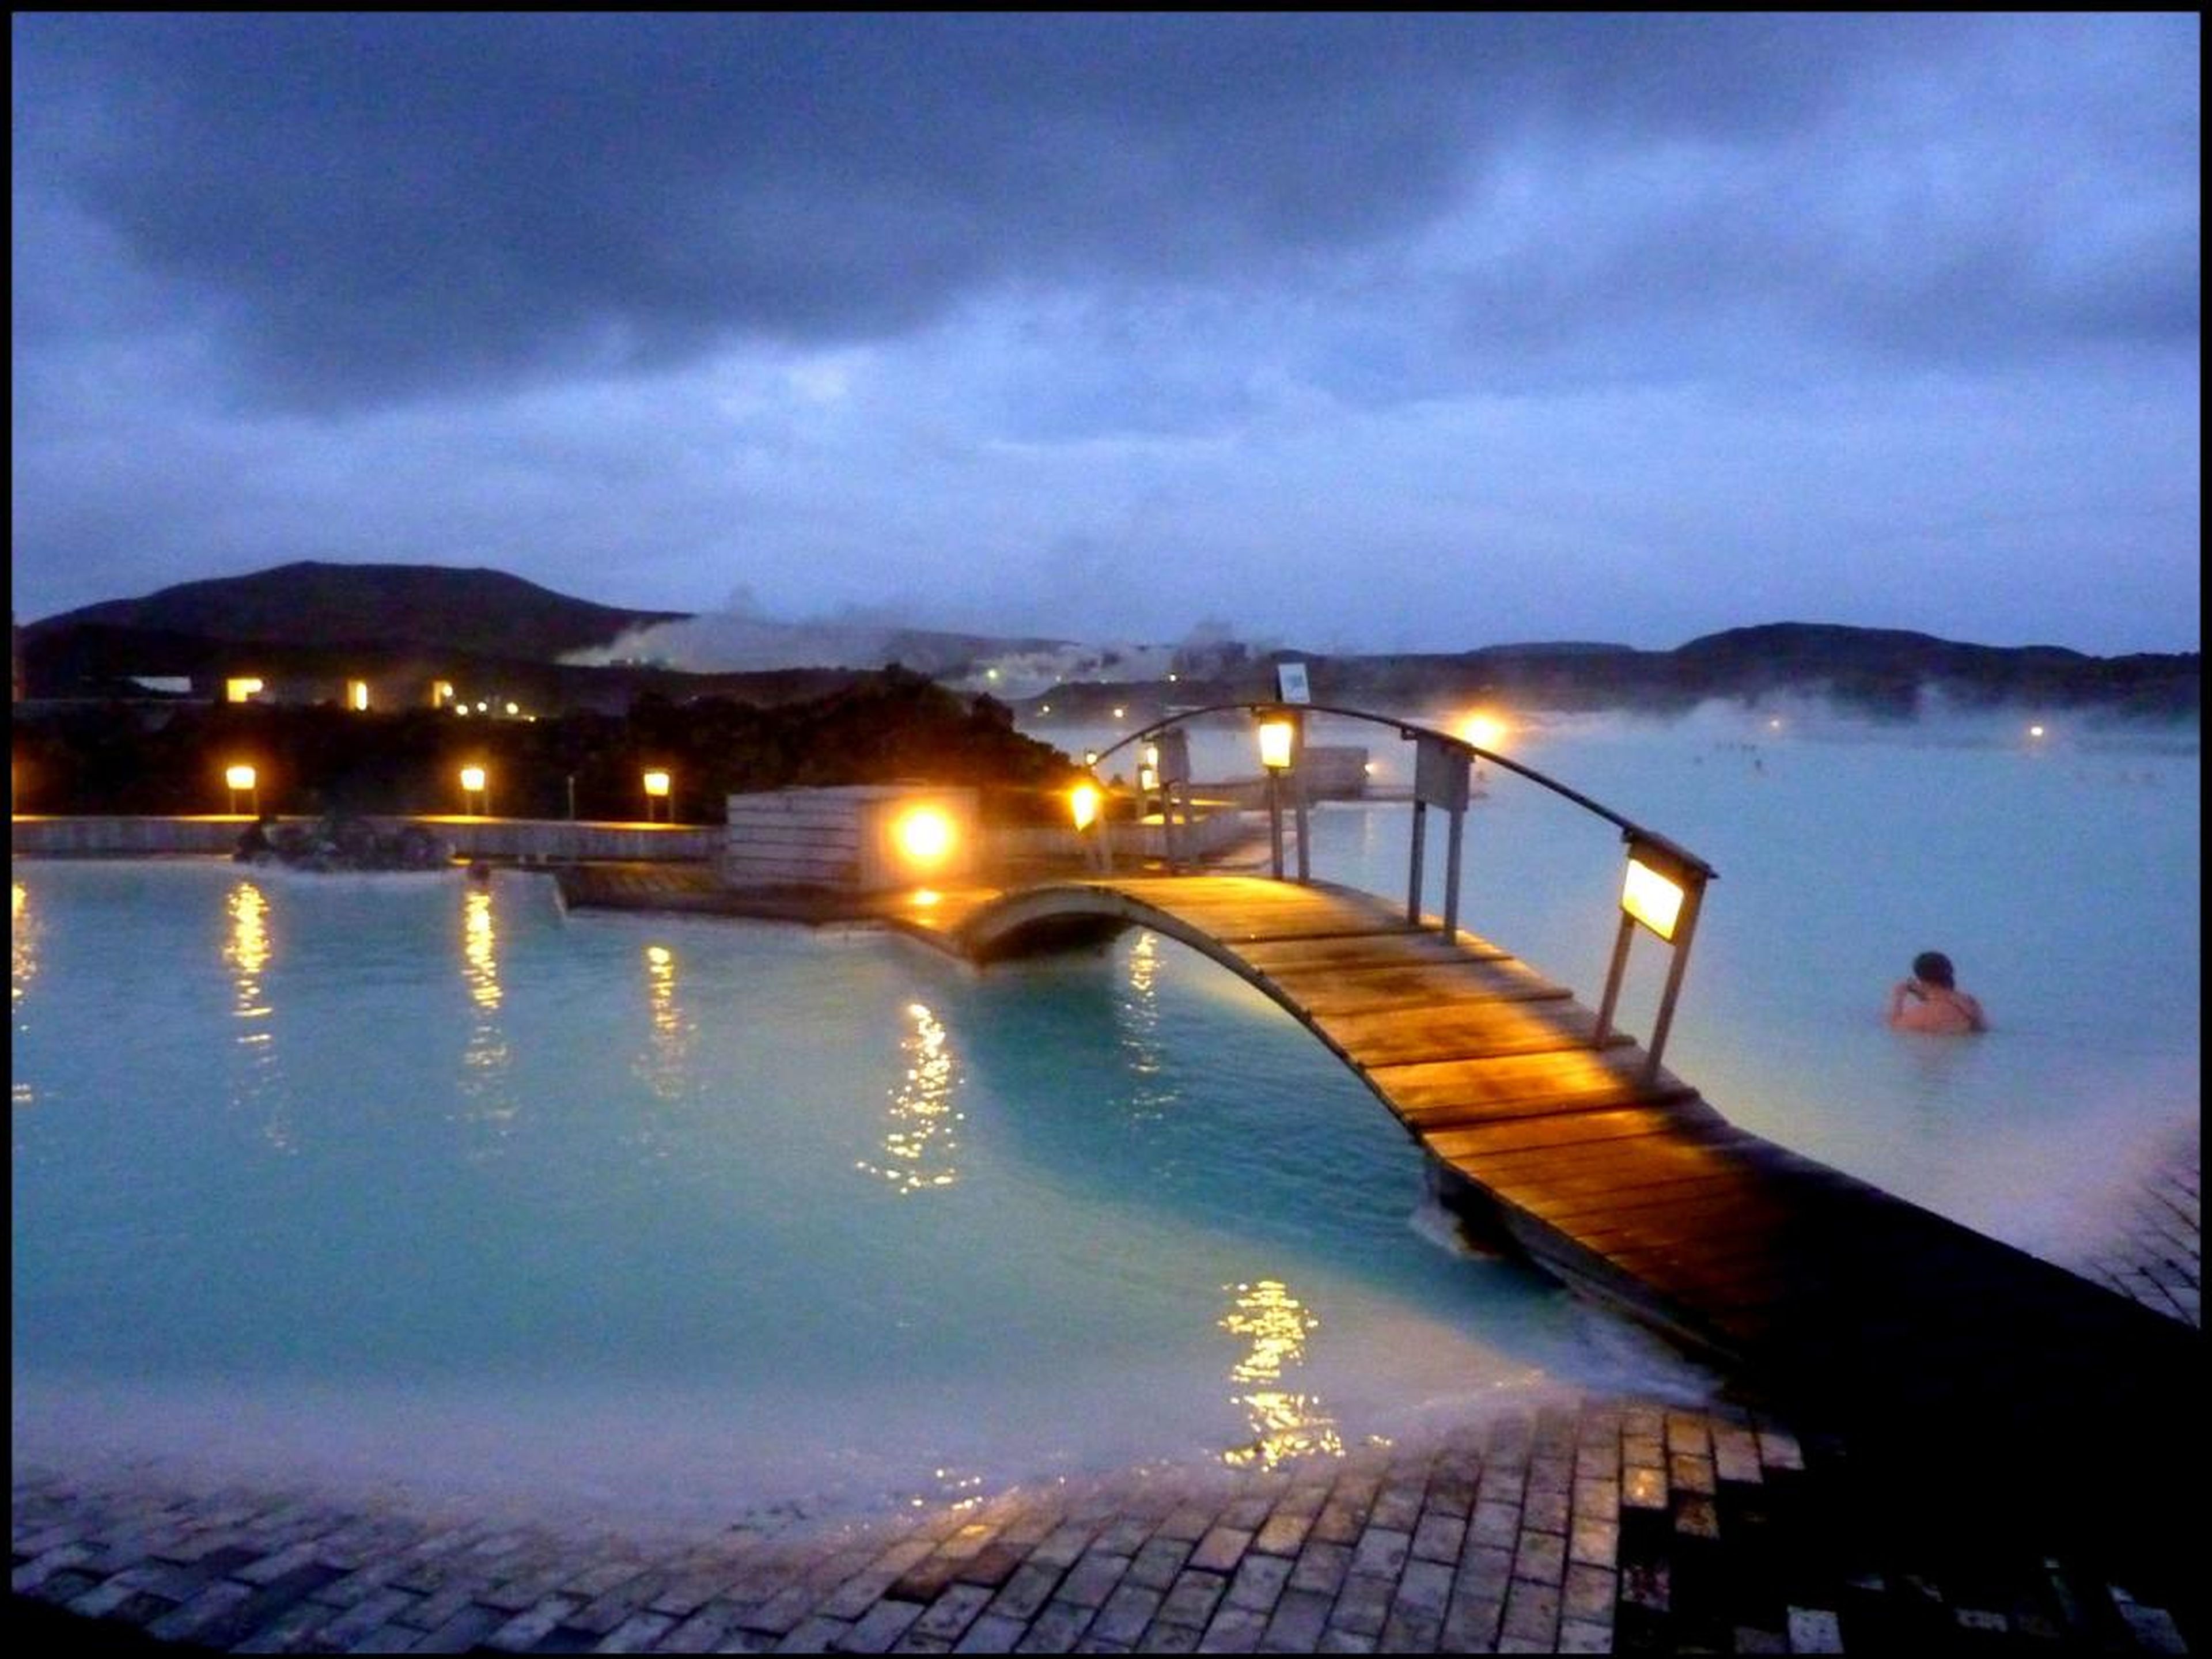 Blue Lagoon, Iceland, pictured at night.